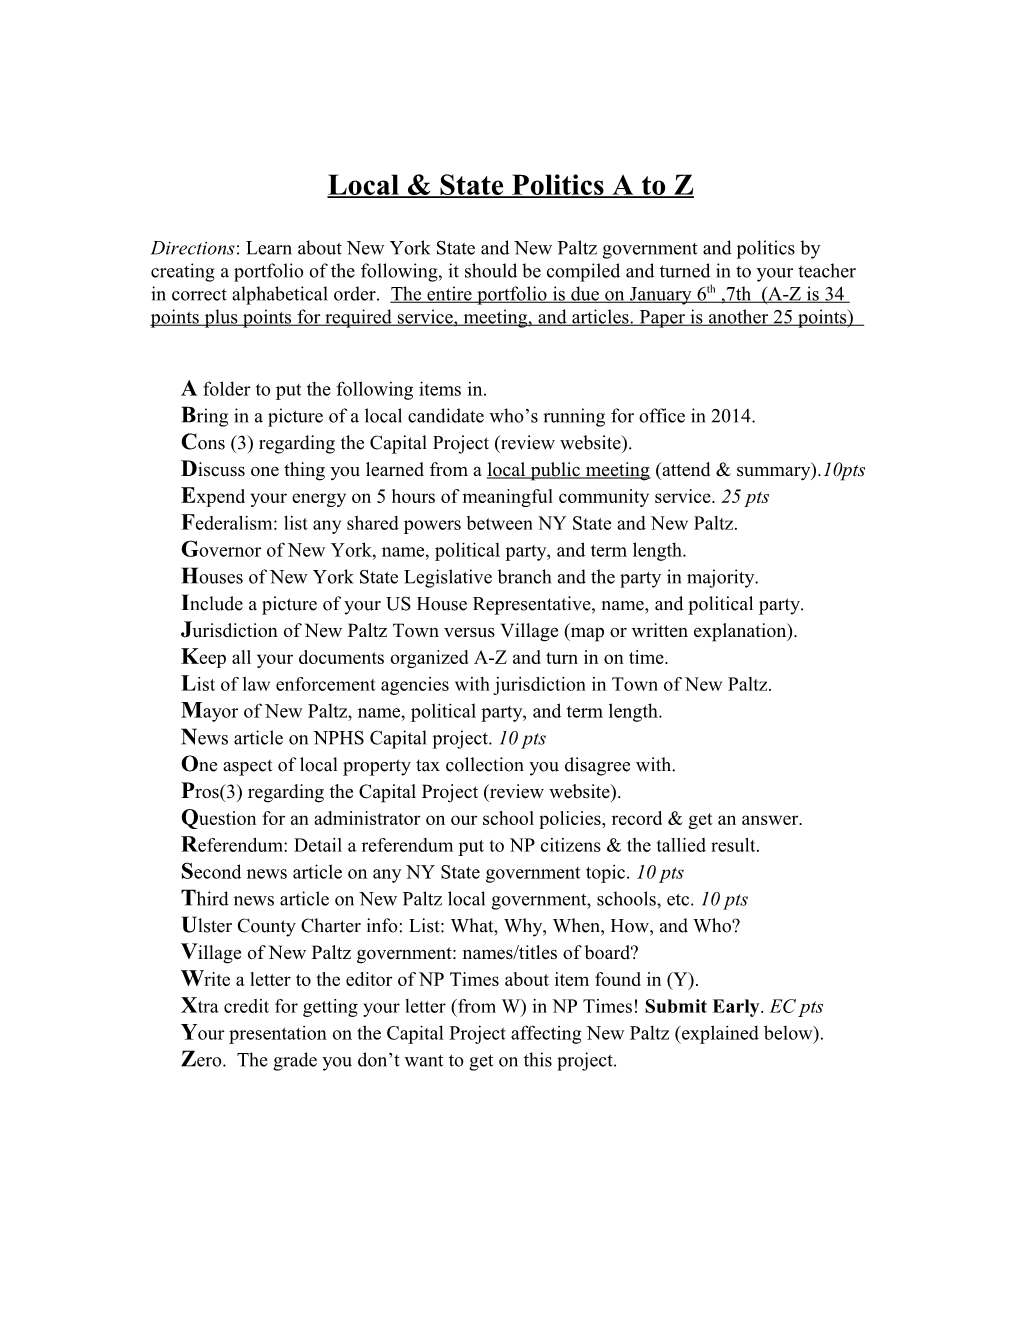 Local & State Politics a to Z